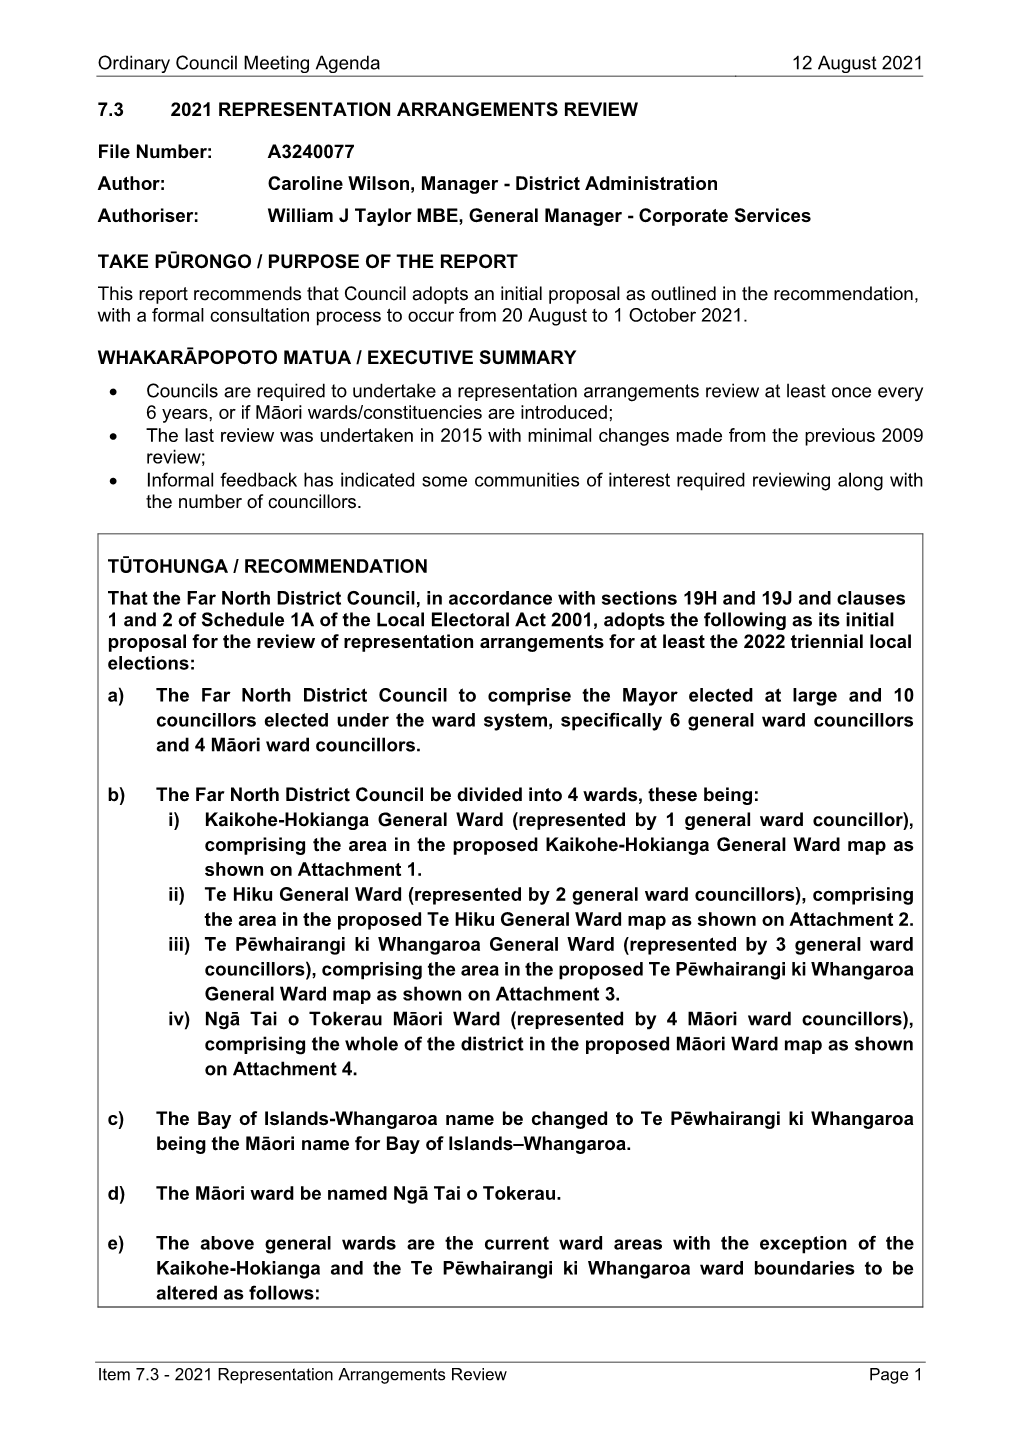 Ordinary Council Meeting Agenda 12 August 2021